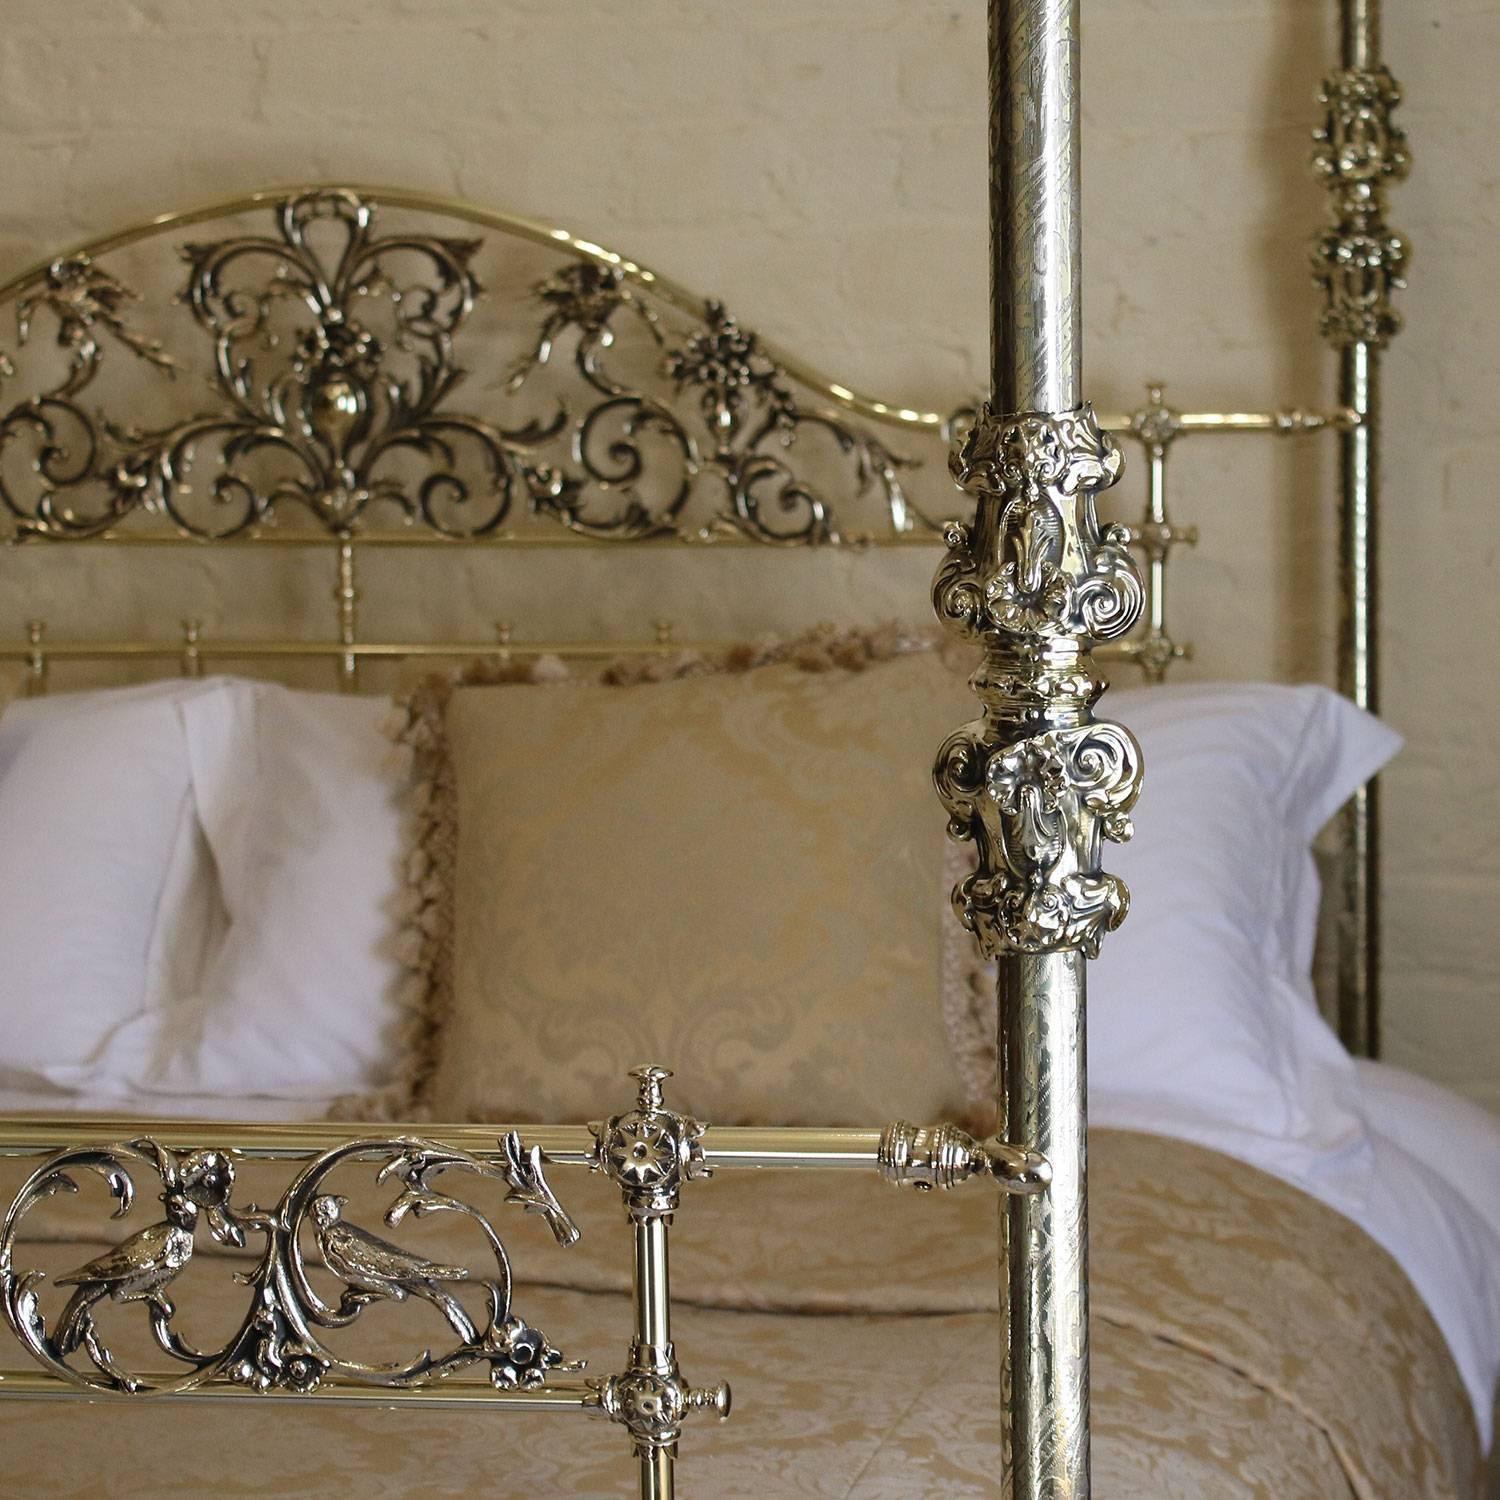 A magnificent all brass four poster bed with etched posts, ornate brass fittings, decorative brass knee-caps, delicate castings depicting song birds and serpentine canopy with brass crown.

This superb four poster bed was originally manufactured